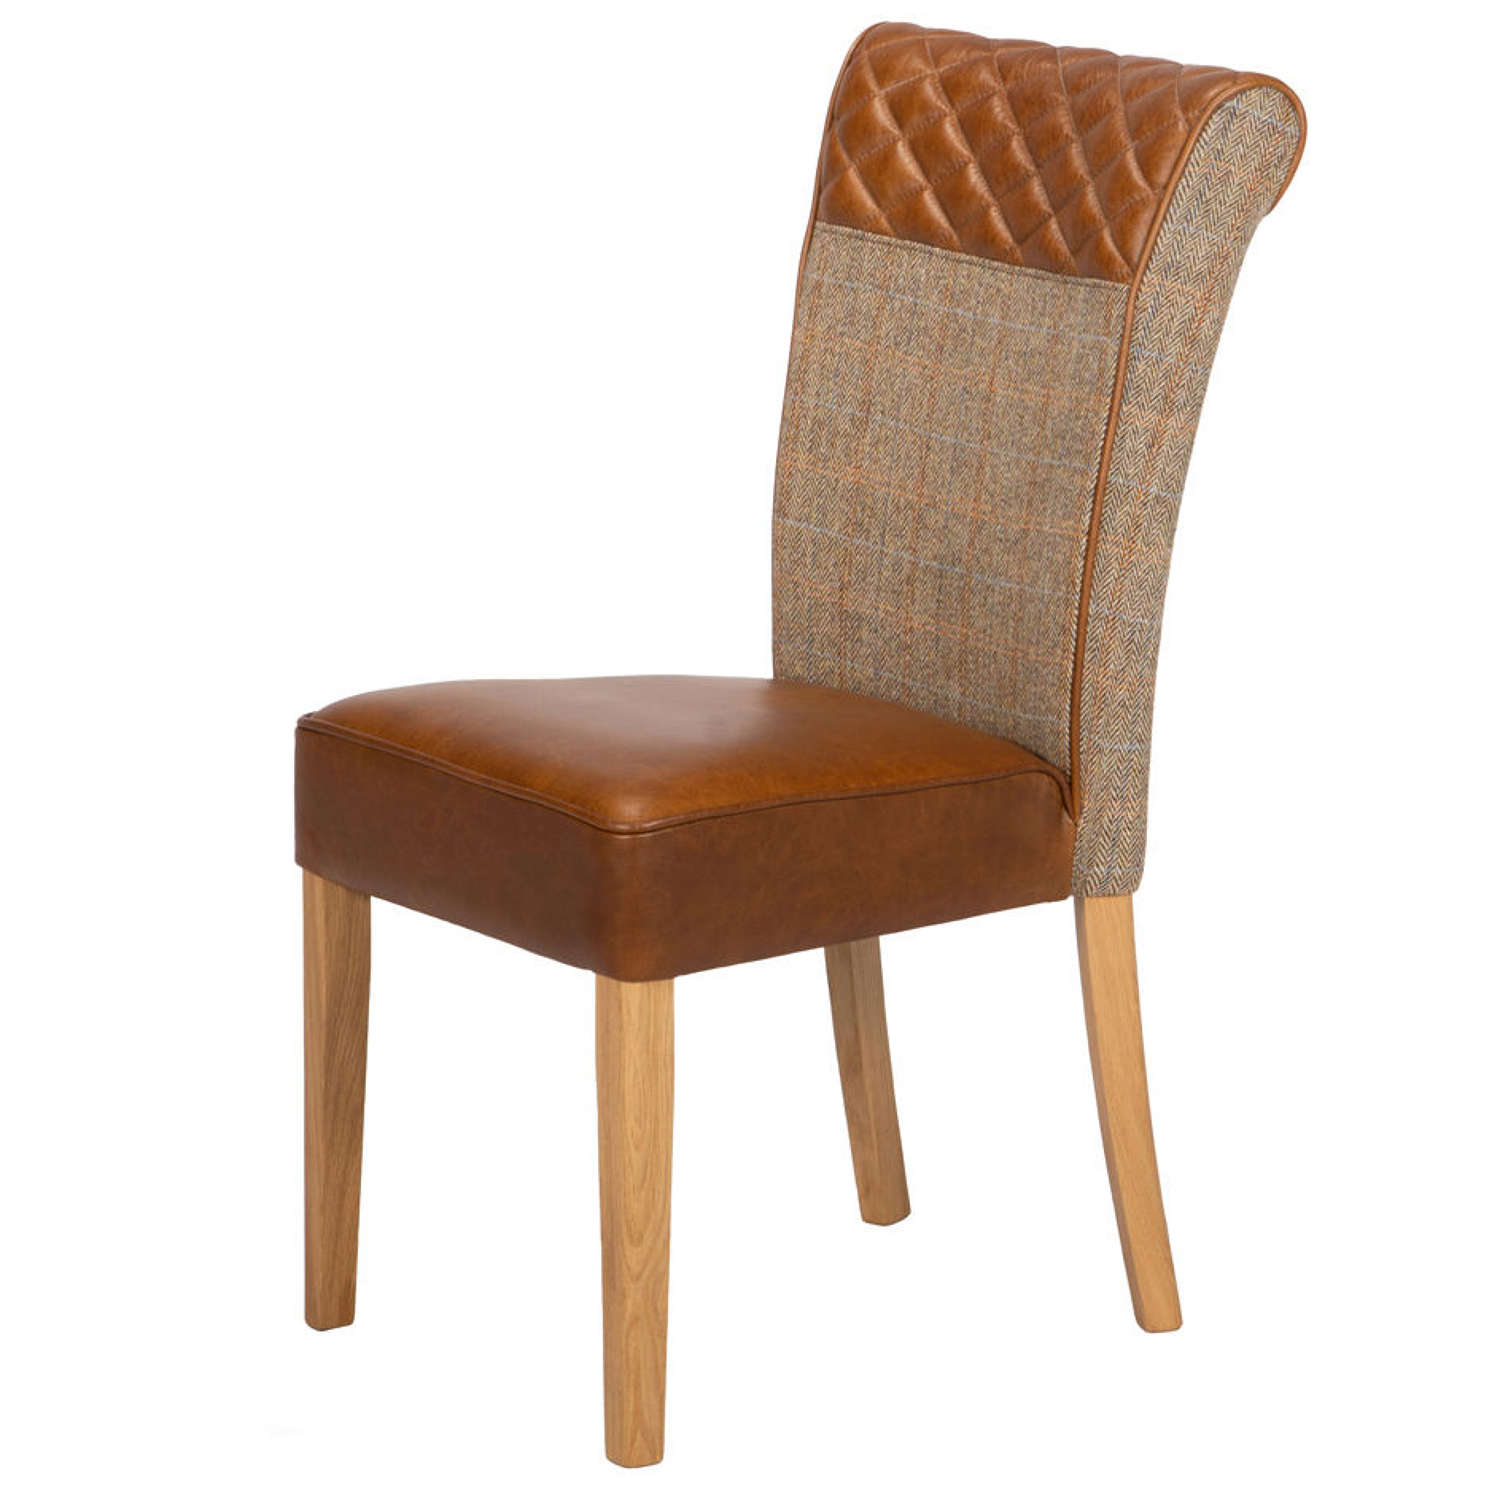 Stamford Dining chair in harris tweed and leather